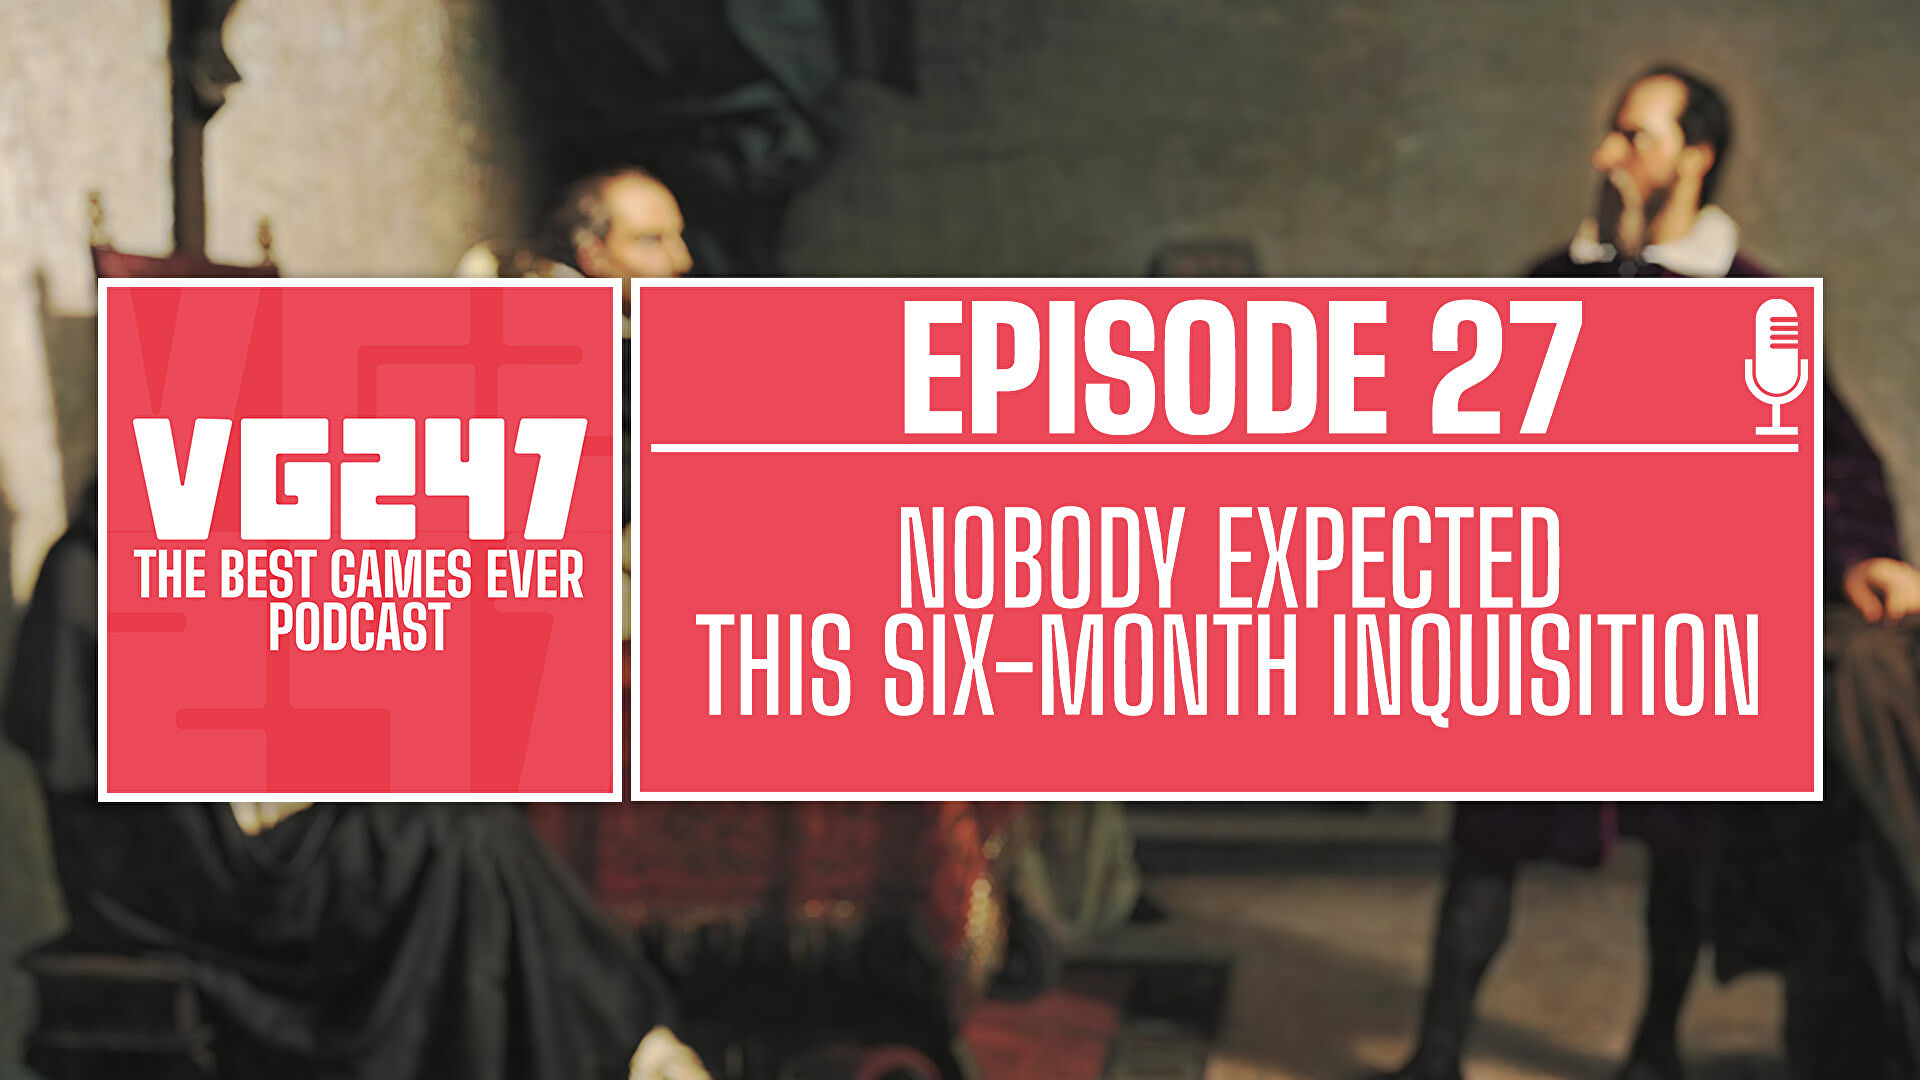 VG247’s The Best Games Ever Podcast: The 6-month Inquisition Special